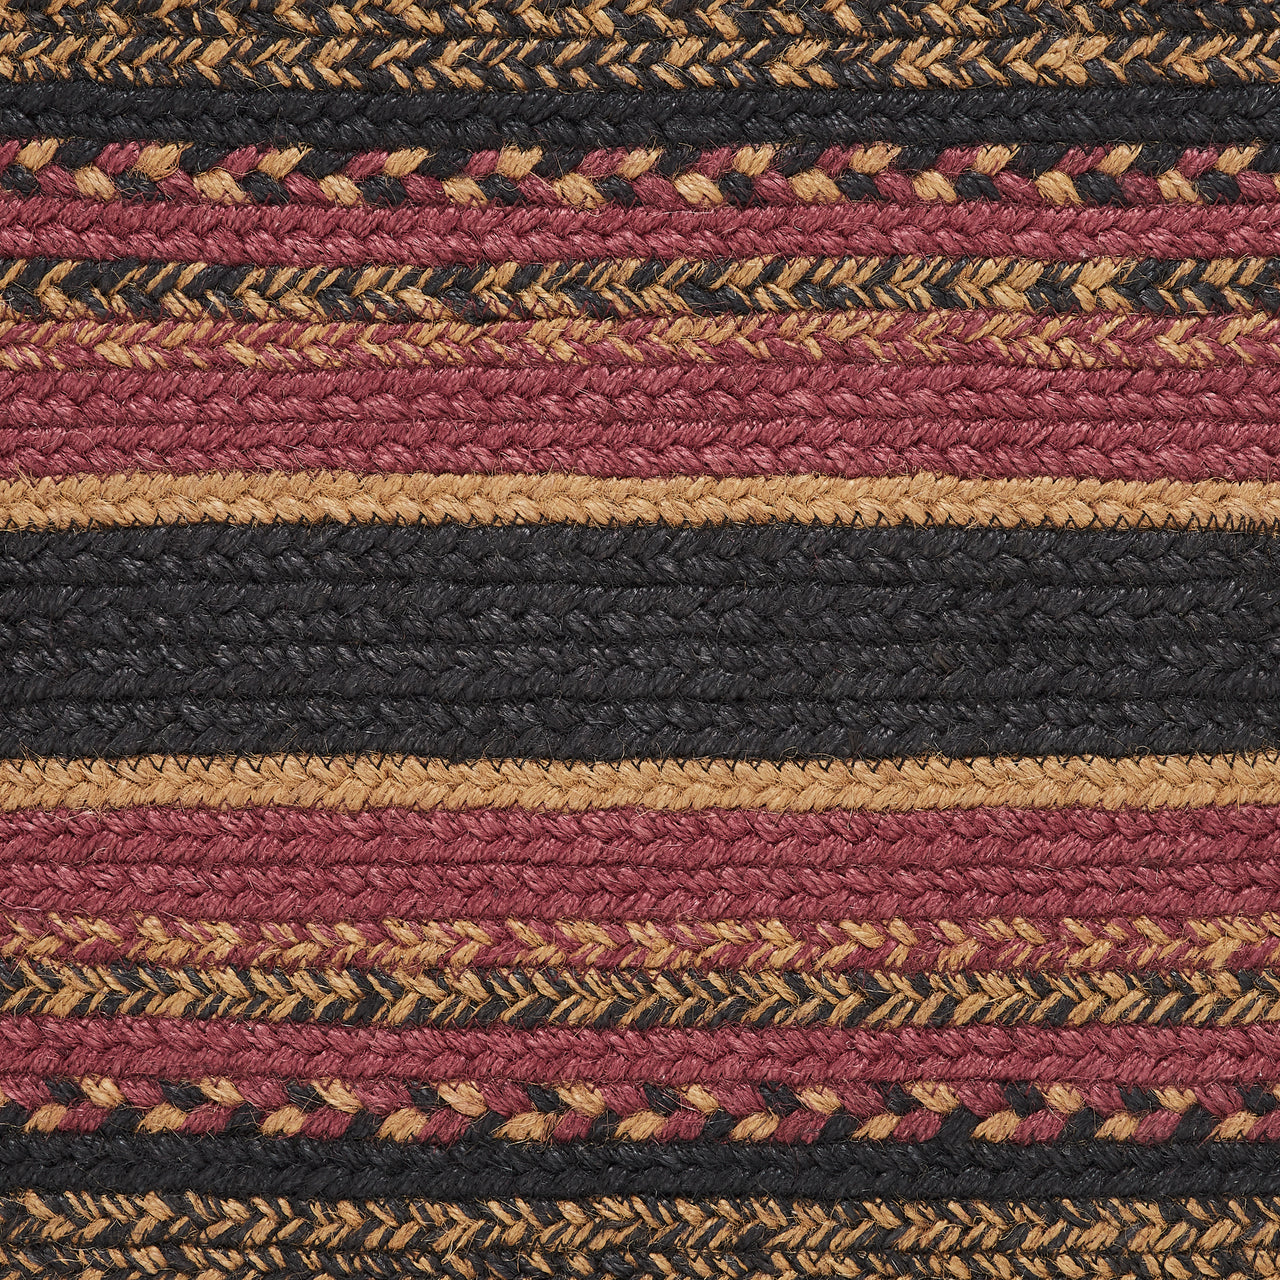 Heritage Farms Jute Braided Rug Rect. with Rug Pad 5'x8' VHC Brands